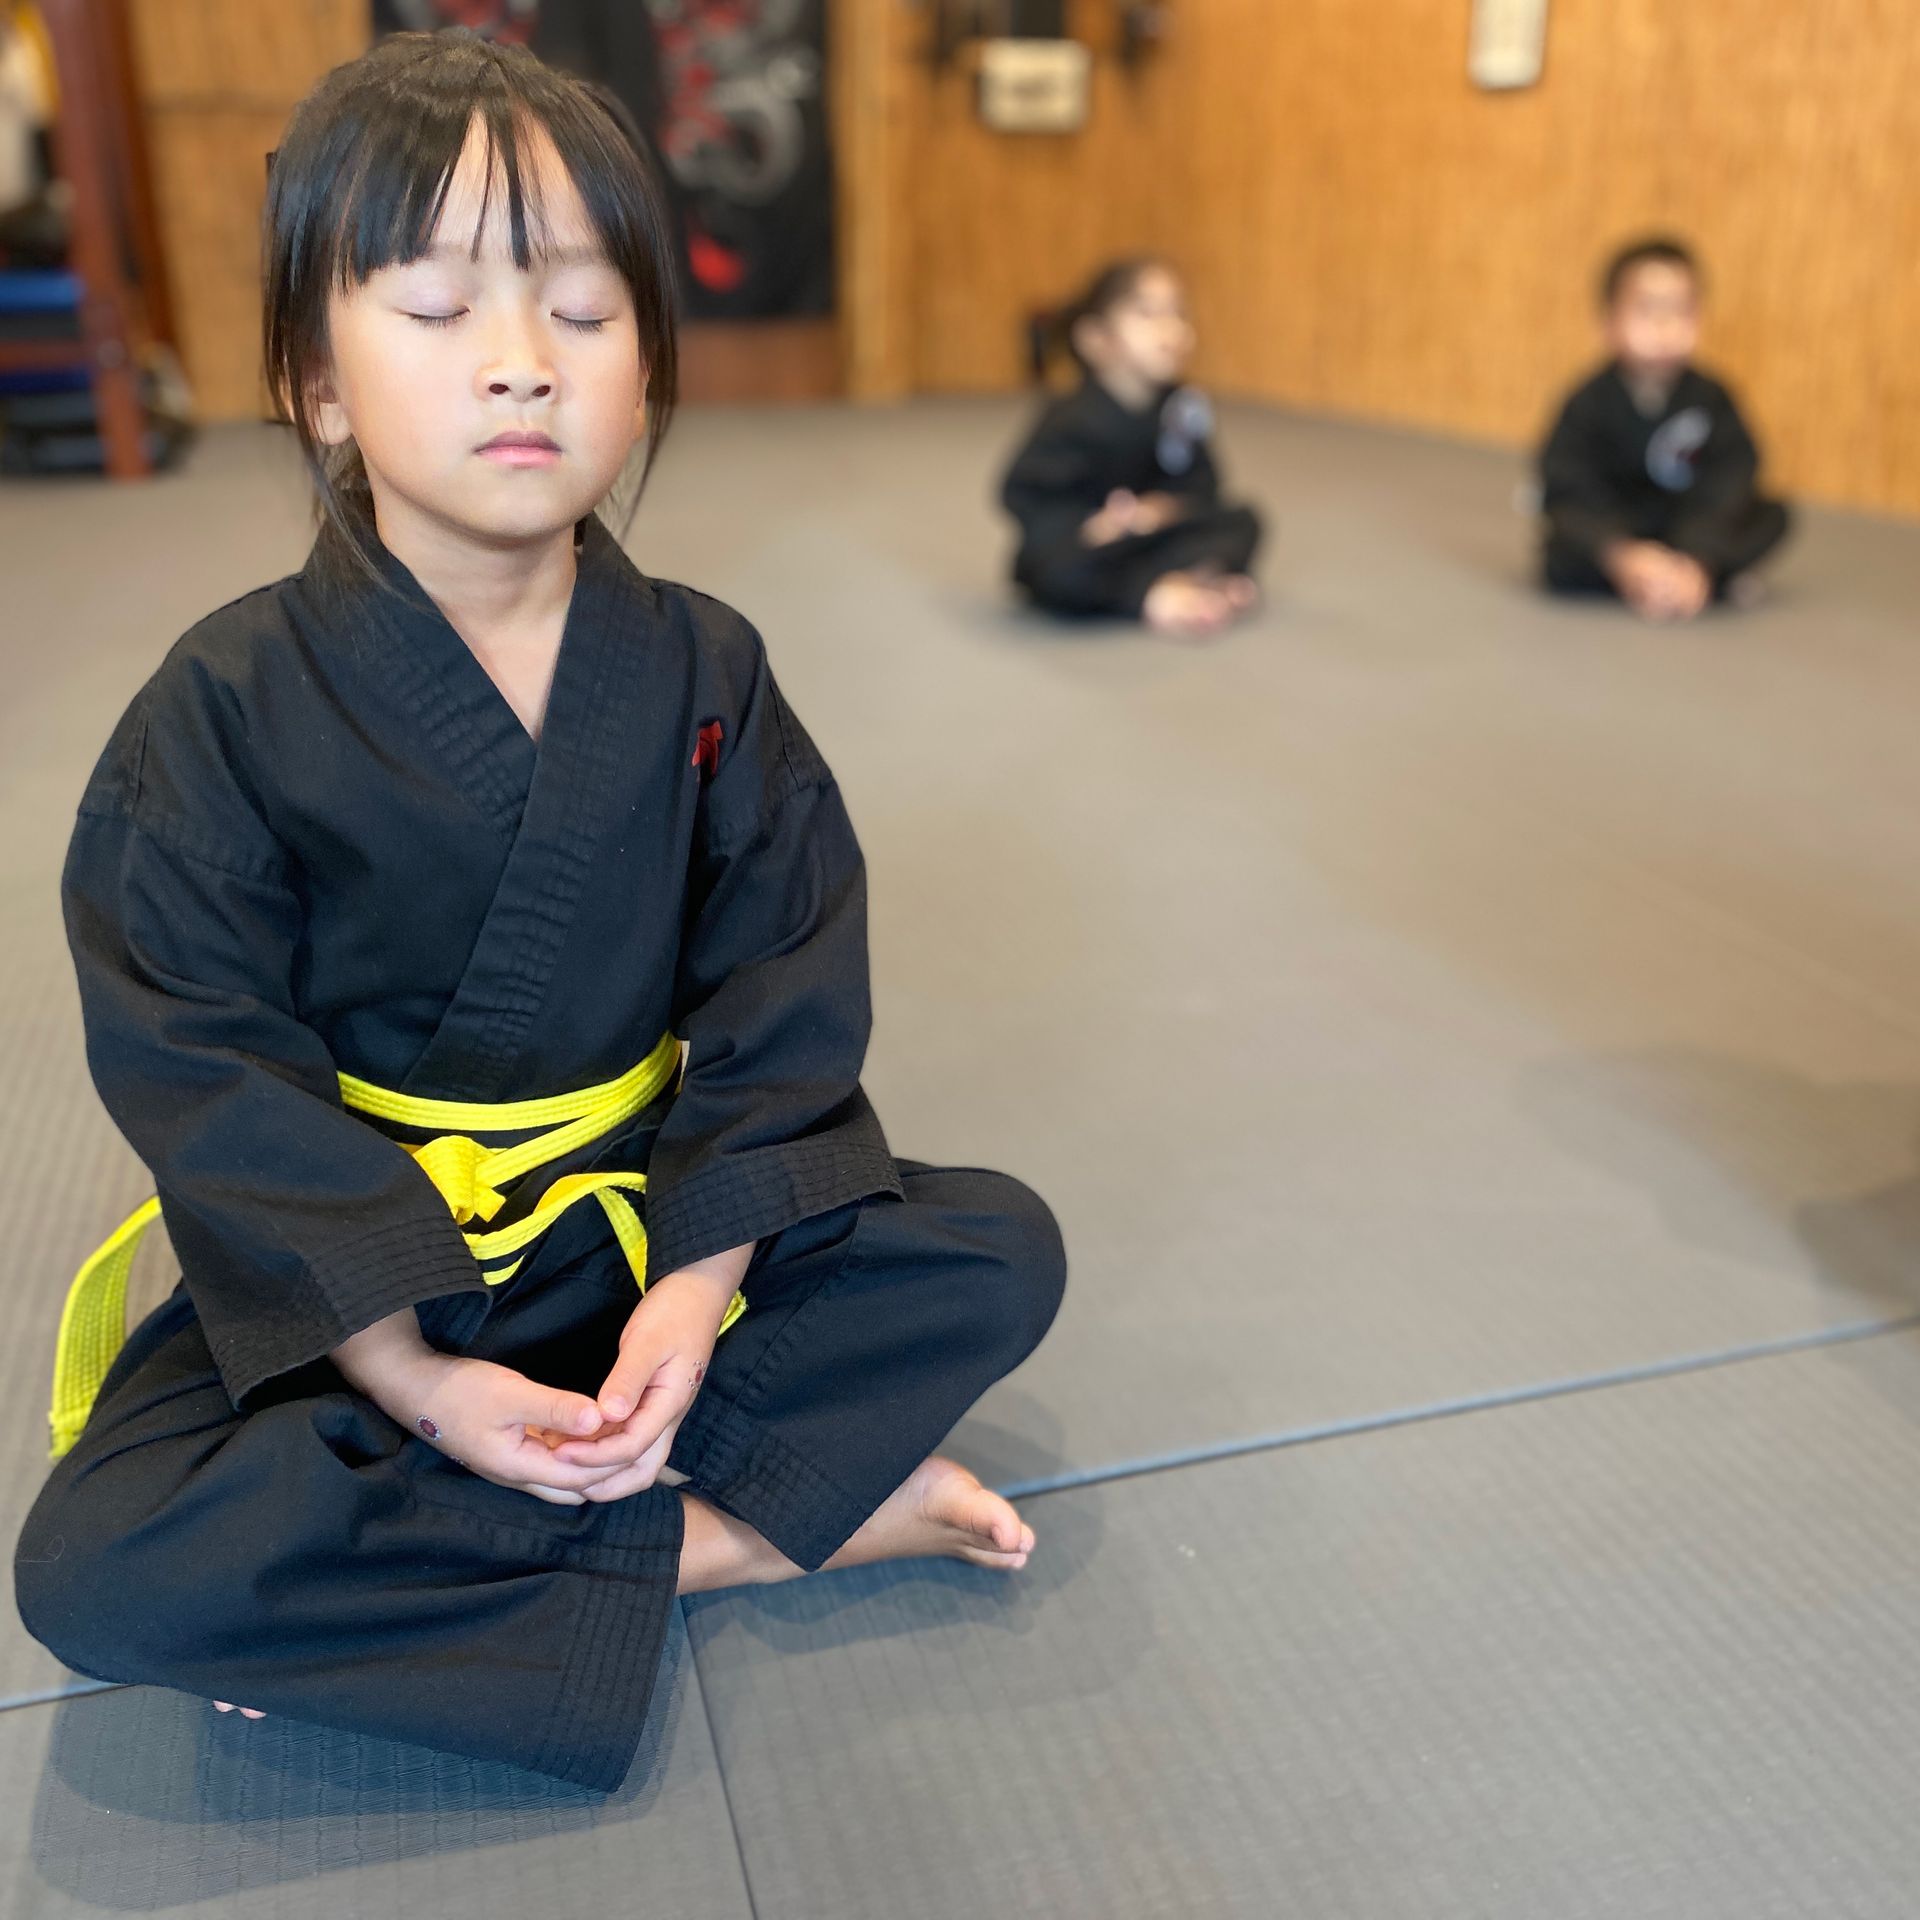 A little girl in a black karate uniform sits on the floor with her eyes closed